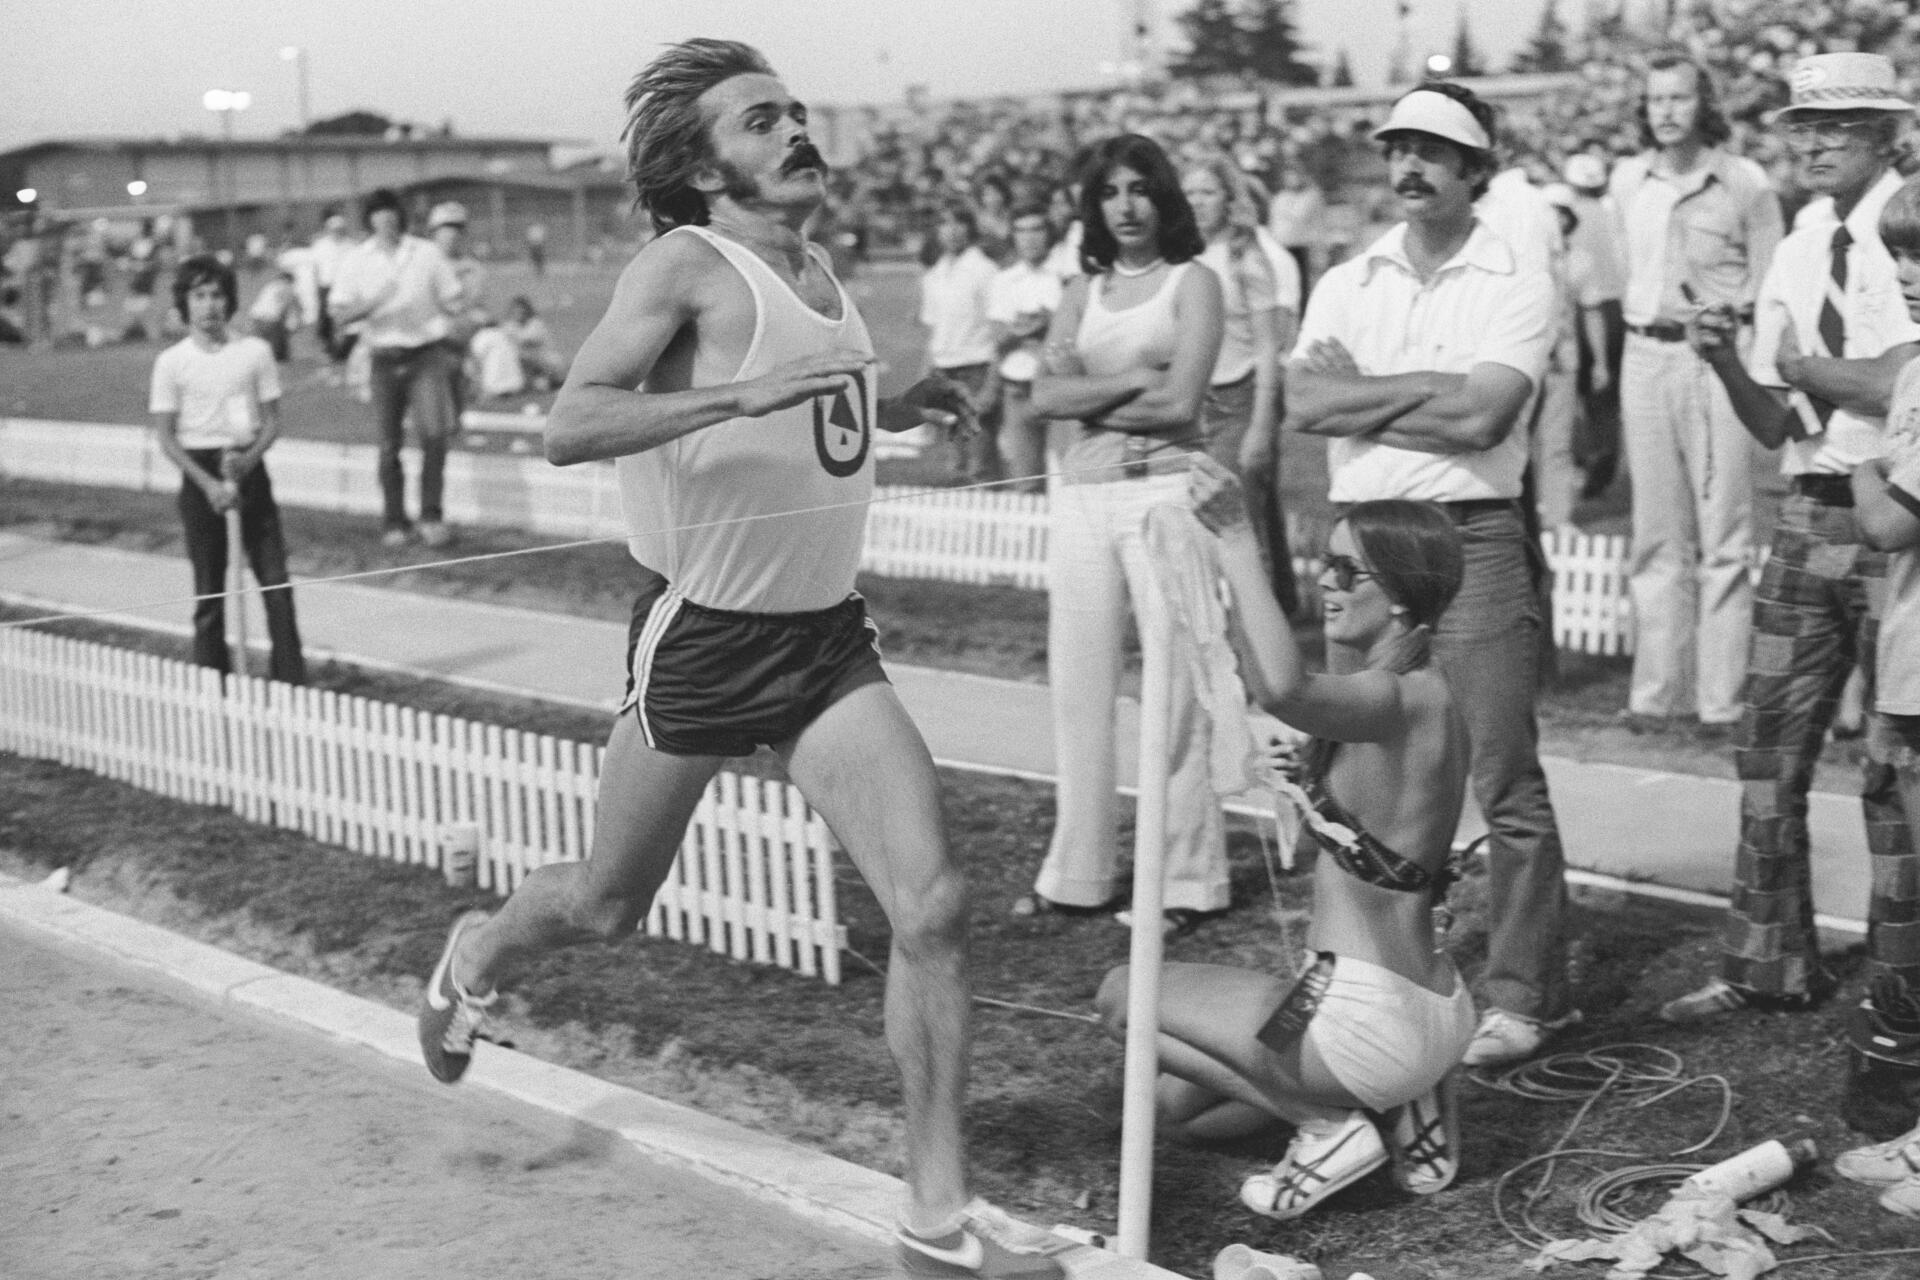 Steve Prefontaine won the 2-mile race here at the Modesto Relays in California in 1975.